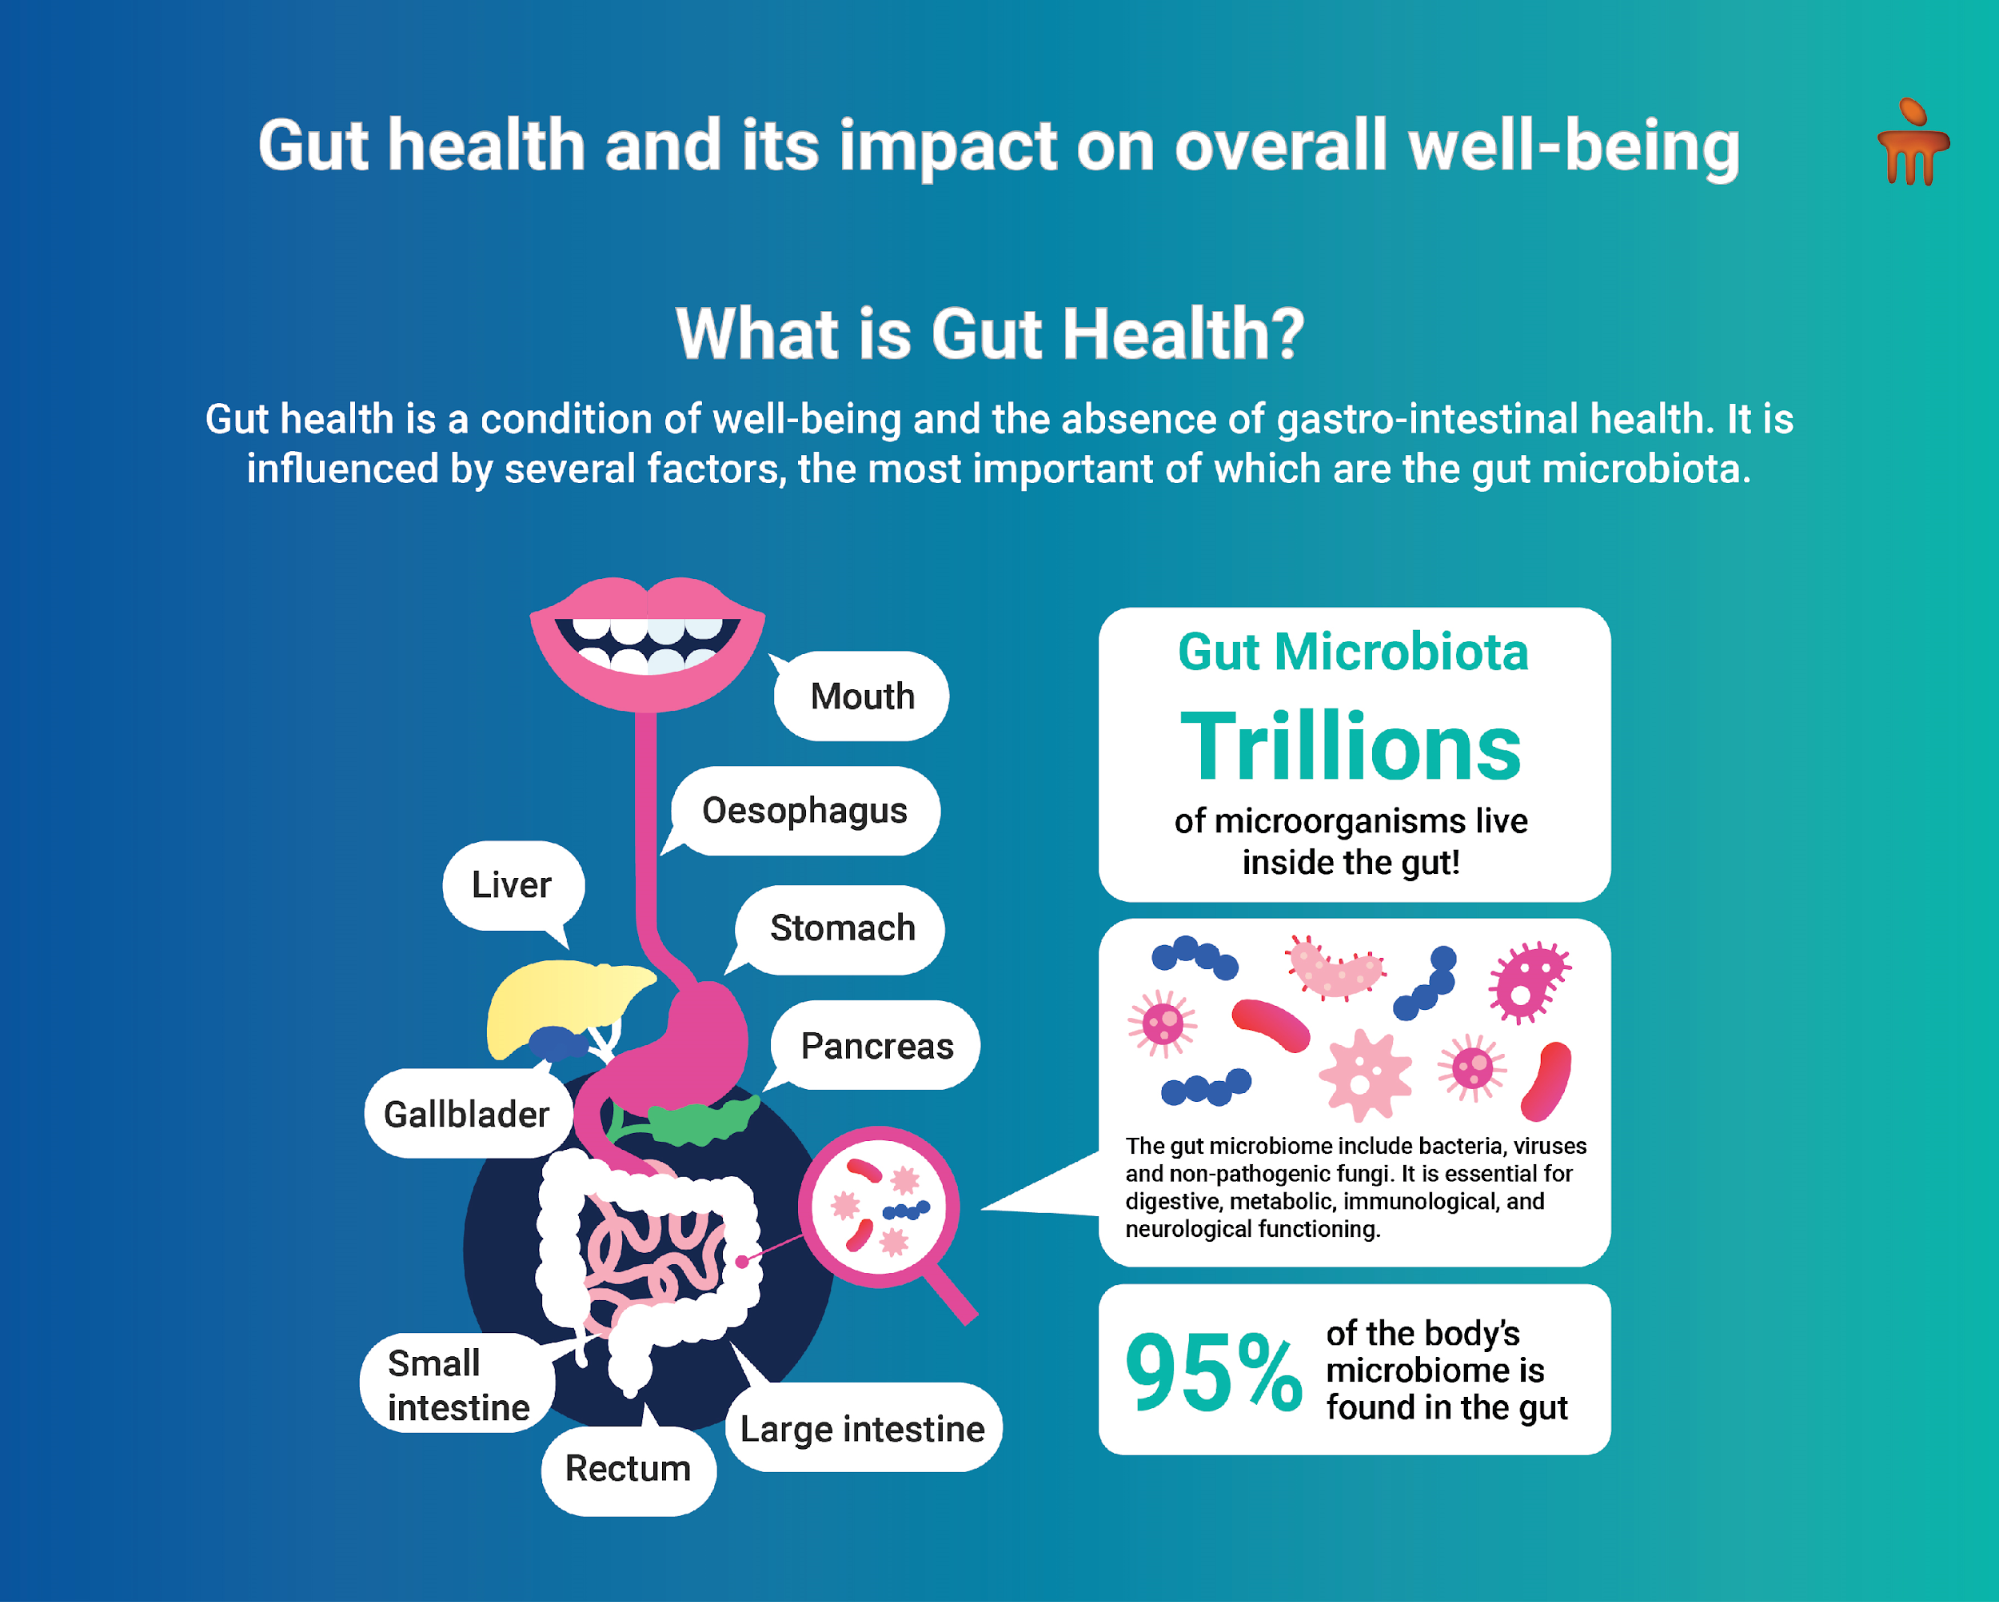 The Impact of Gut Health on Overall Well-being